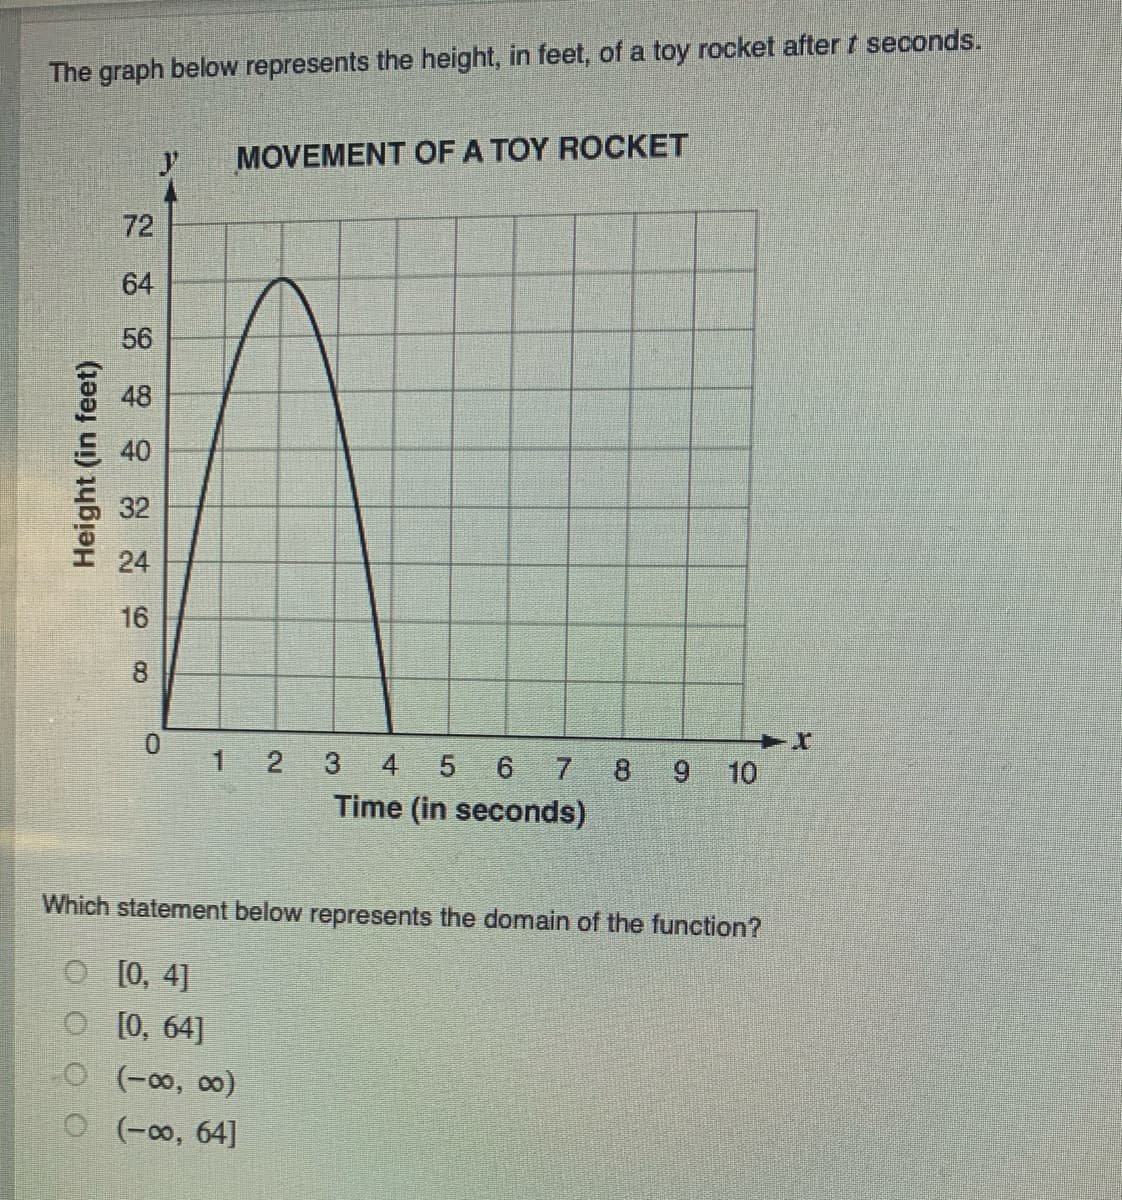 The graph below represents the height, in feet, of a toy rocket after t seconds.
MOVEMENT OF A ΤΟΥ ROCKET
72
64
56
48
40
24
16
8
1 2
3
4
5
7 8
Time (in seconds)
9.
10
Which statement below represents the domain of the function?
O [0, 4]
O [0, 64]
O (-0, 00)
O(-0, 64]
Height (in feet)
